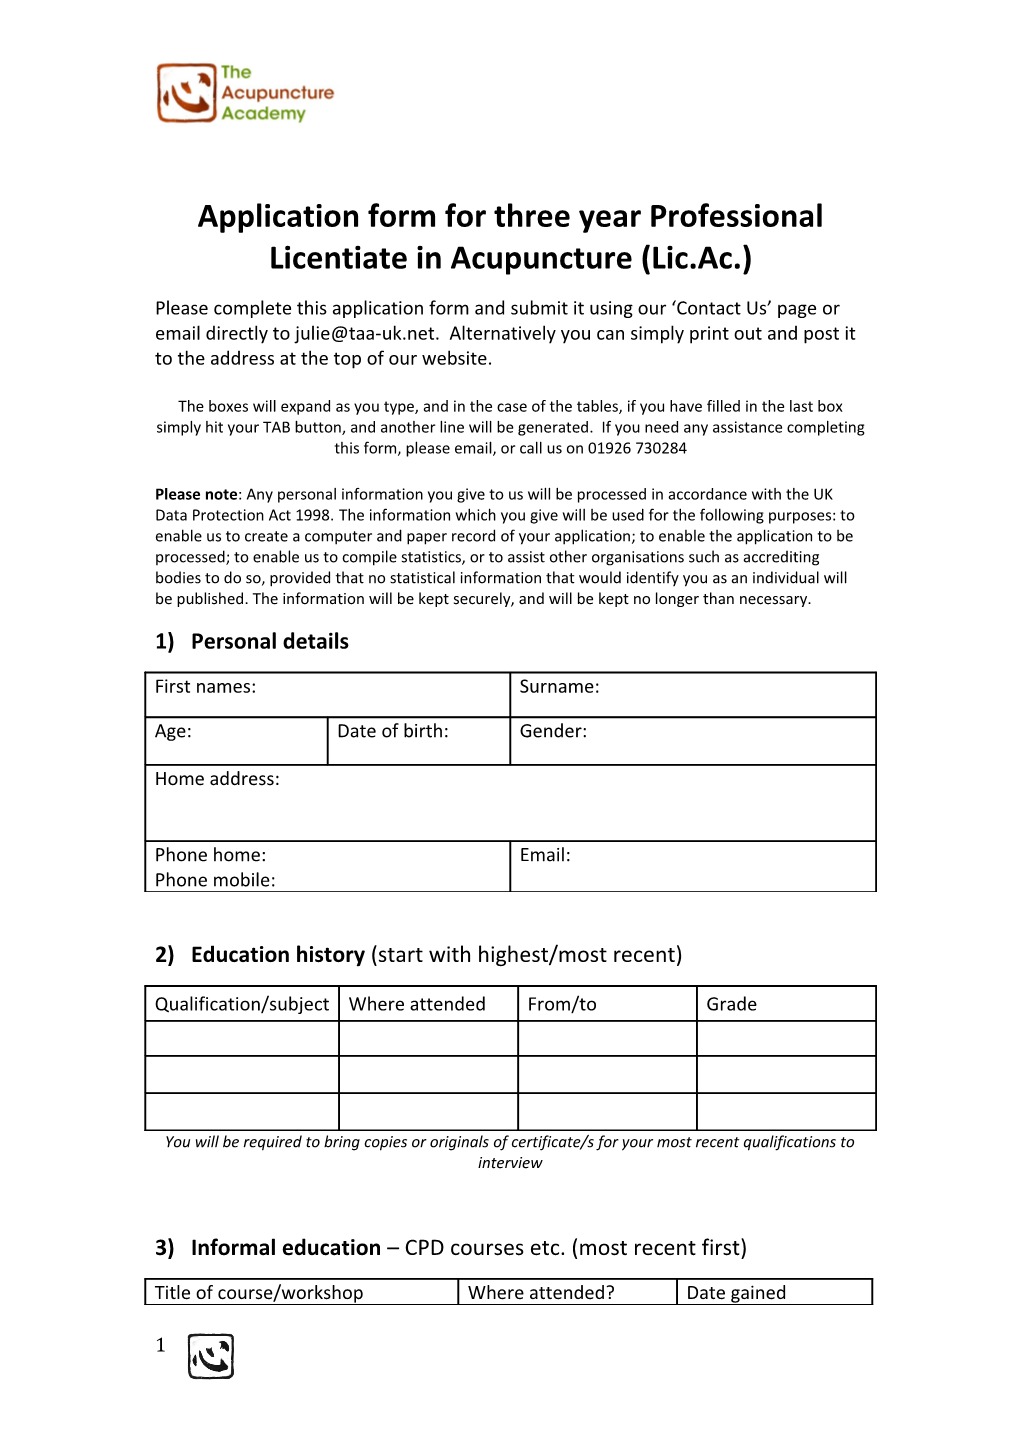 Application Form for Three Year Professional Licentiate in Acupuncture (Lic.Ac.)